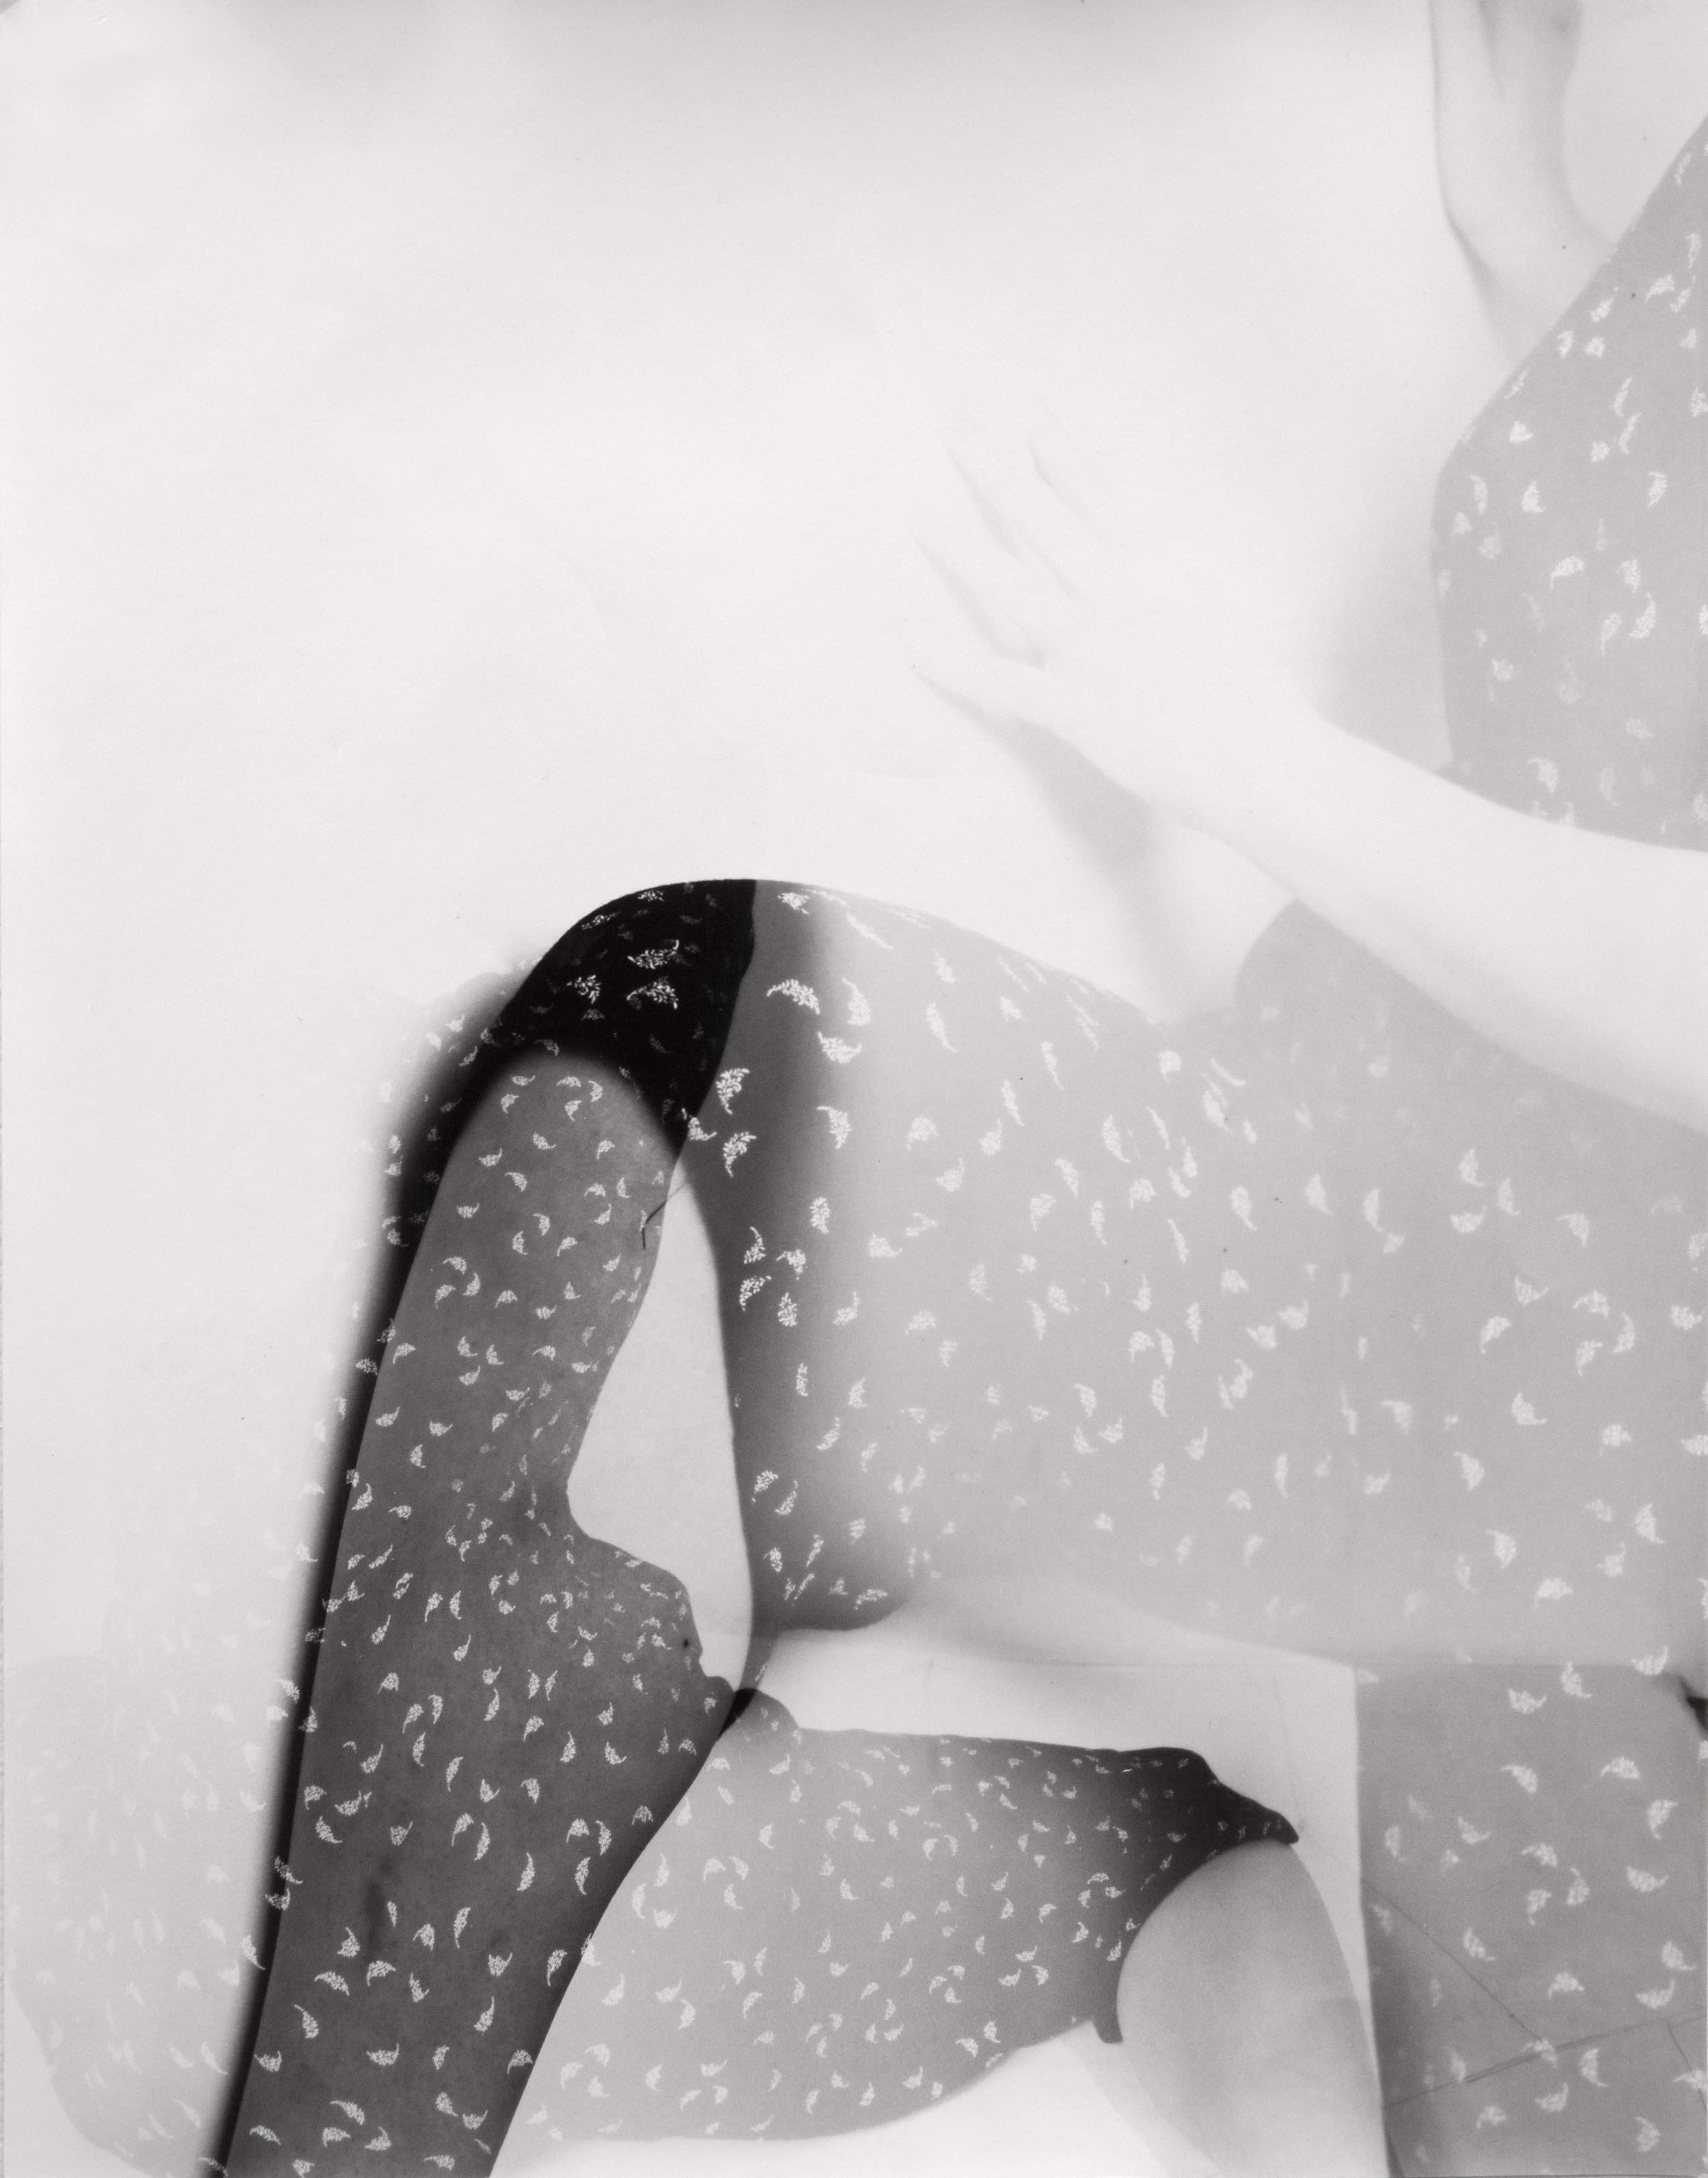 gesture and movement, 2020, gelatin silver print, 14 x 11 in